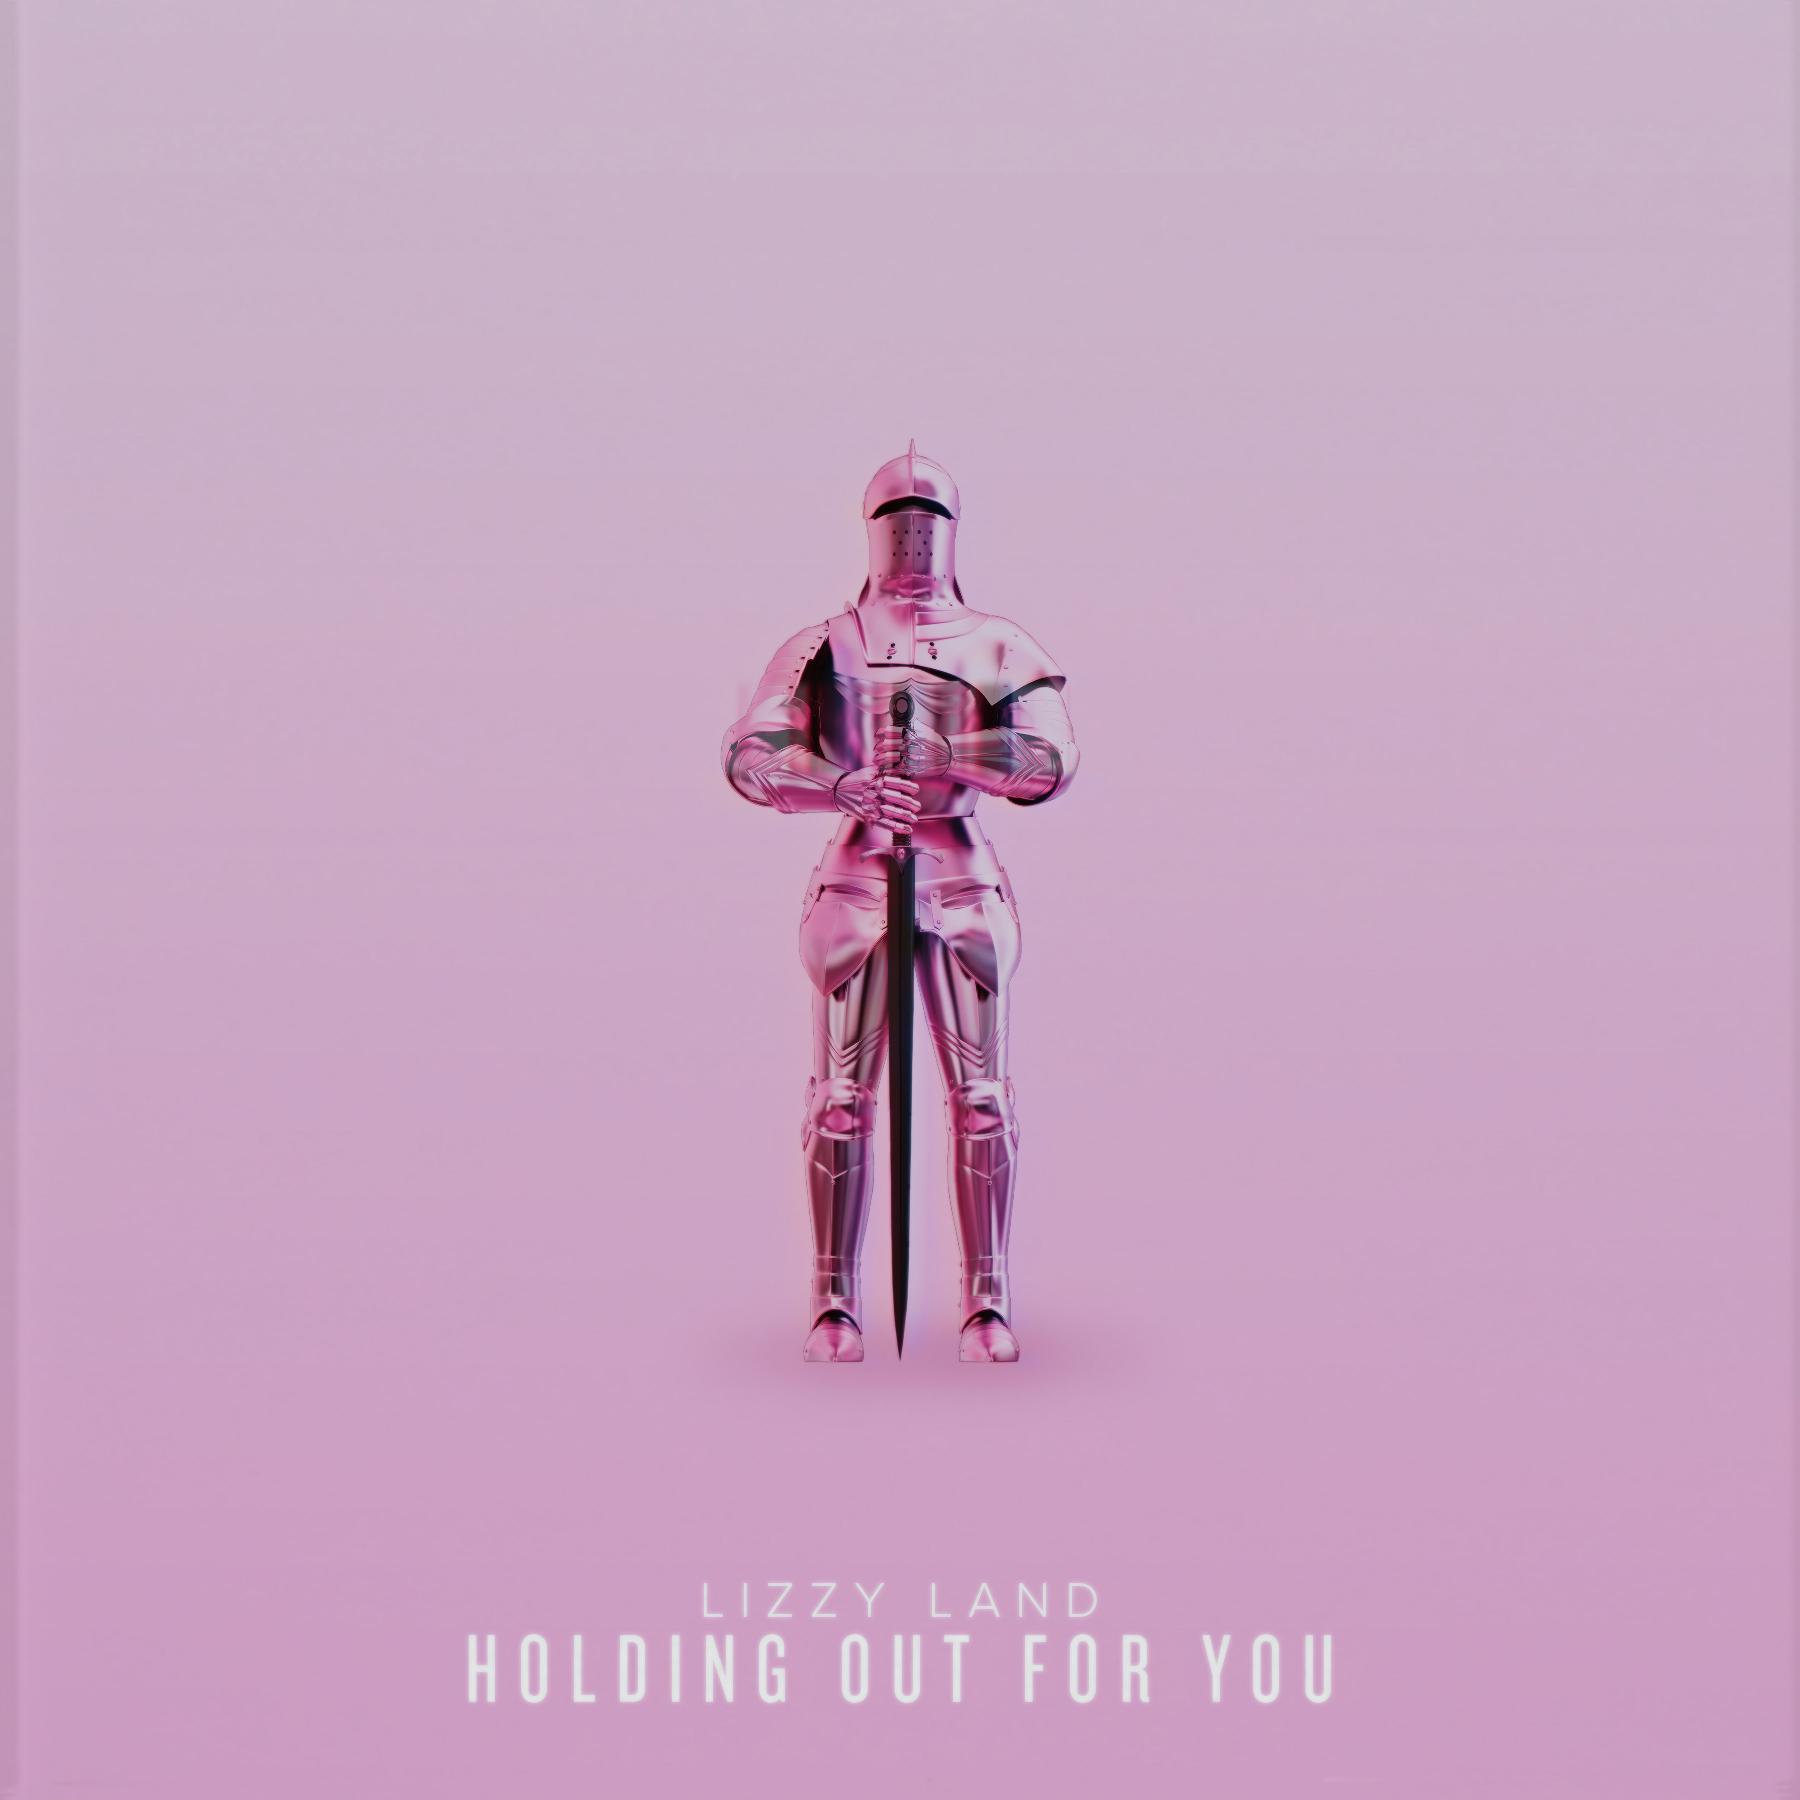 Holding out for You